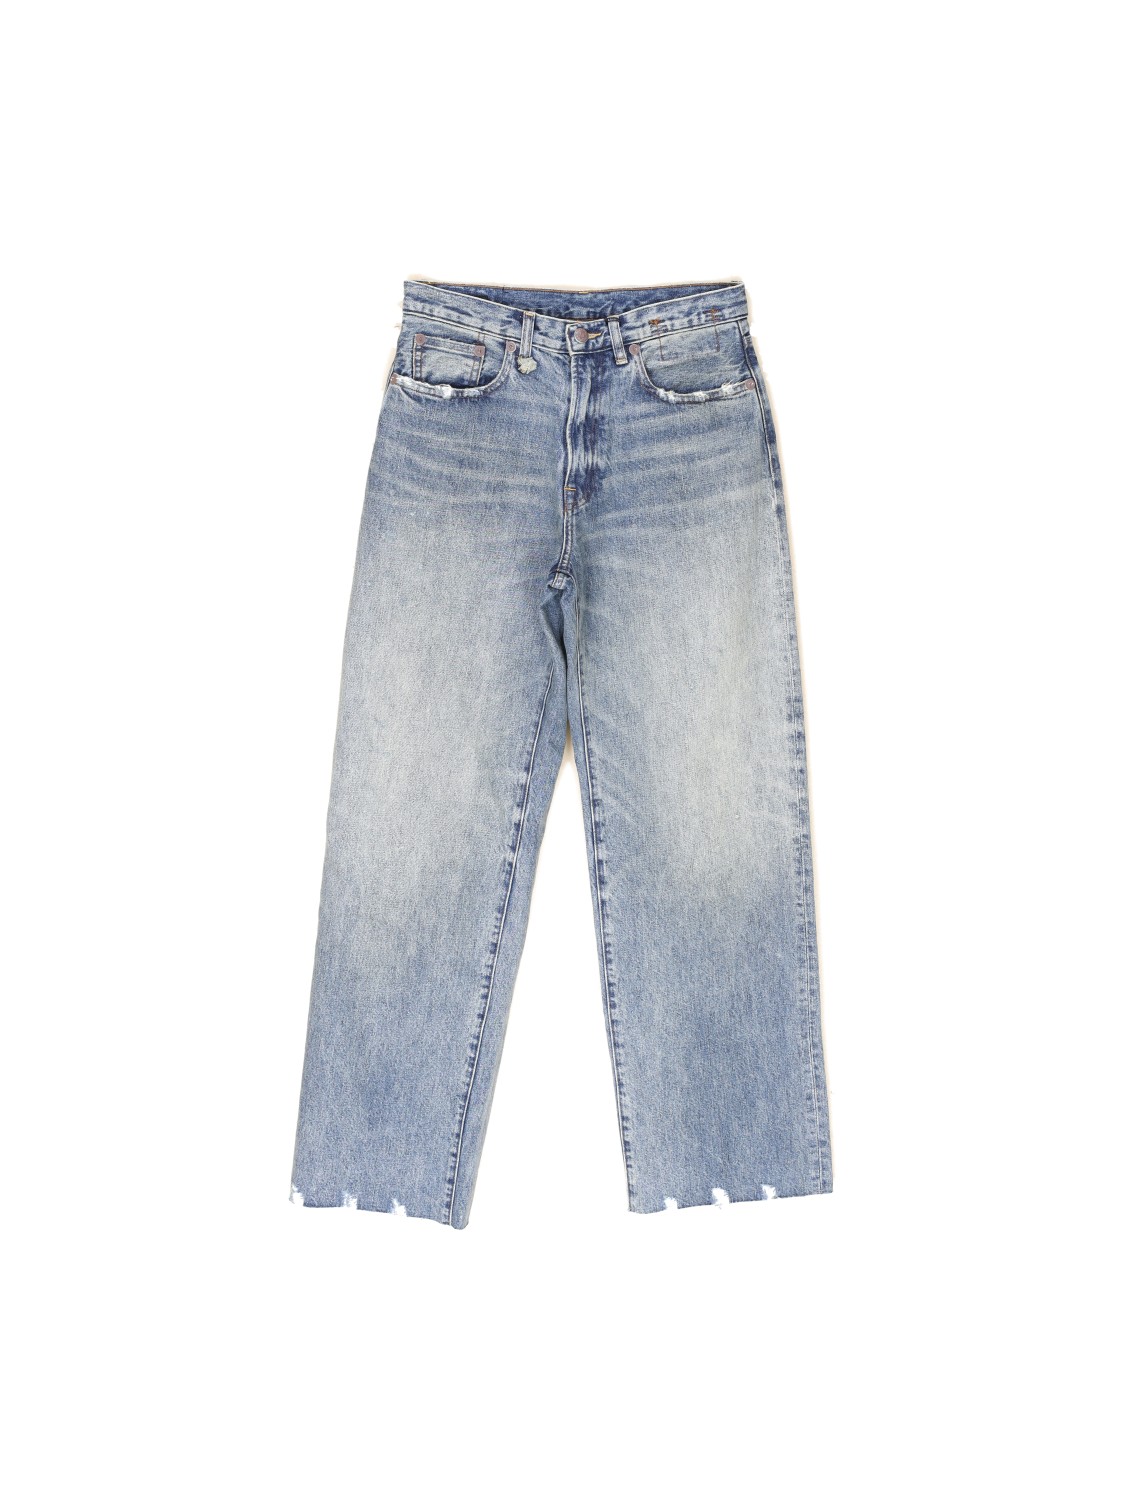 Dárcy - Vintage boyfriend jeans with washed effects 